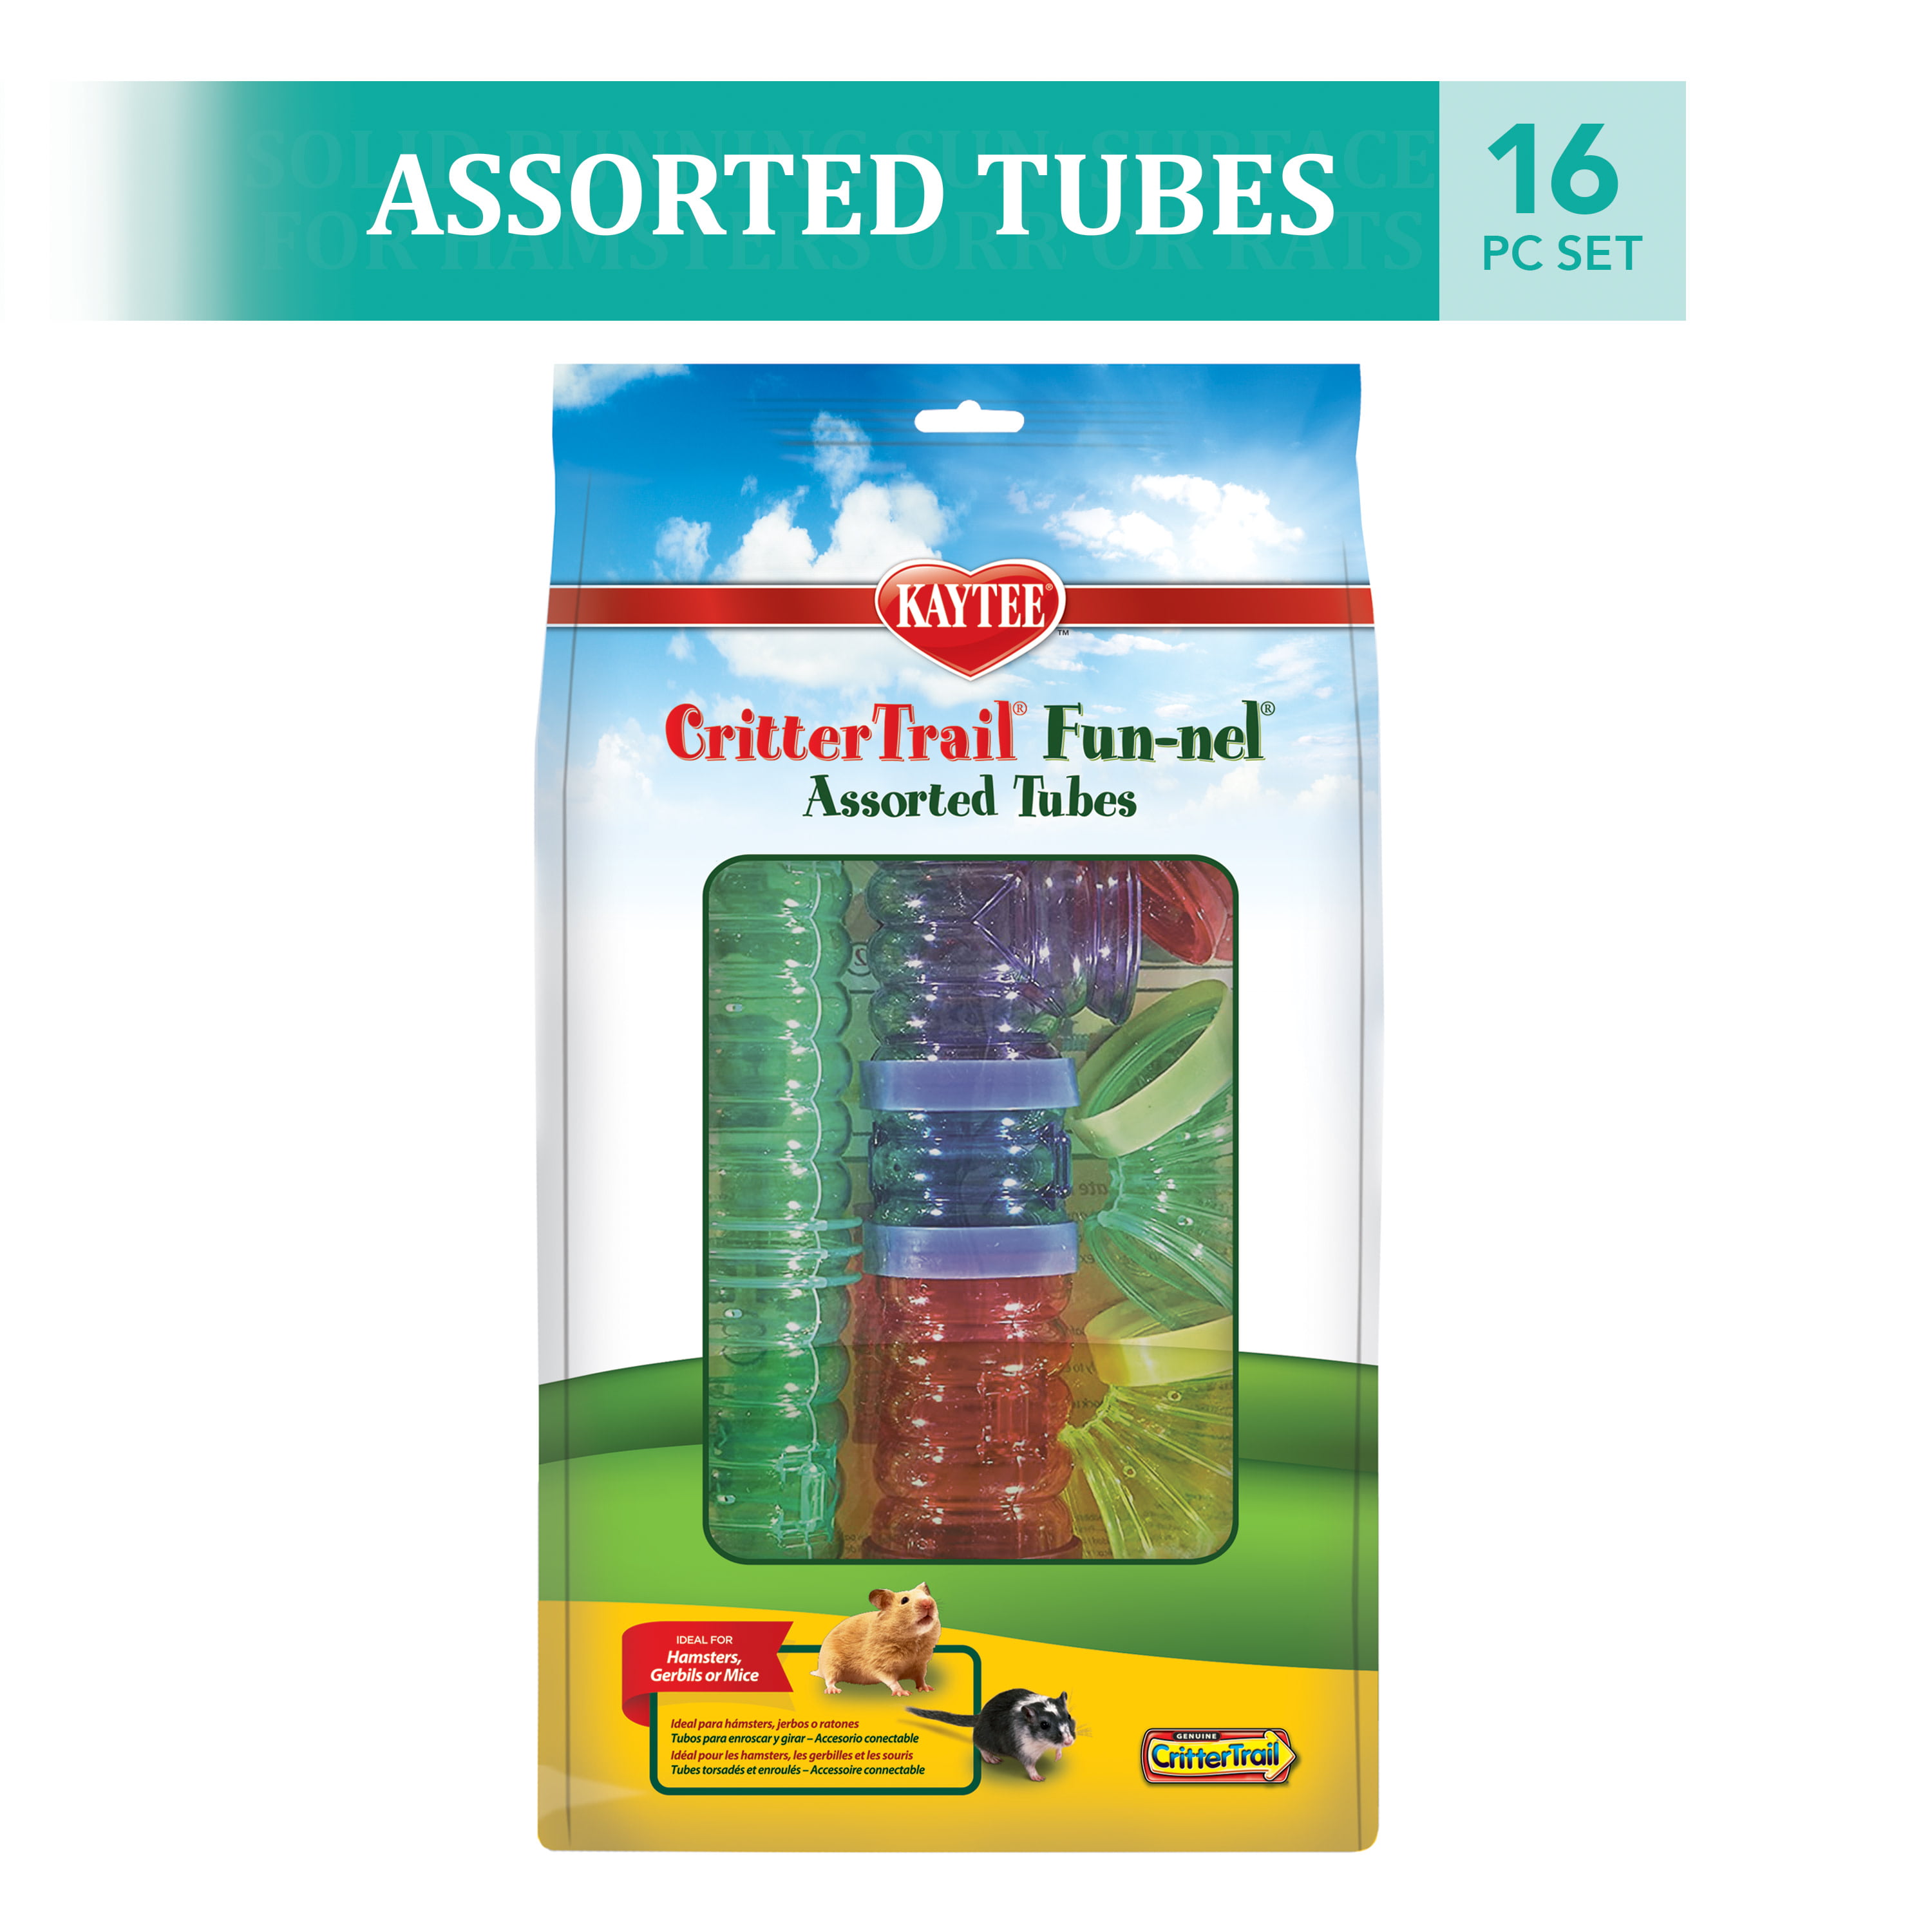 BIG FUN HAMSTER TUBES KIT WITH 6 DIFFERENT TUBES